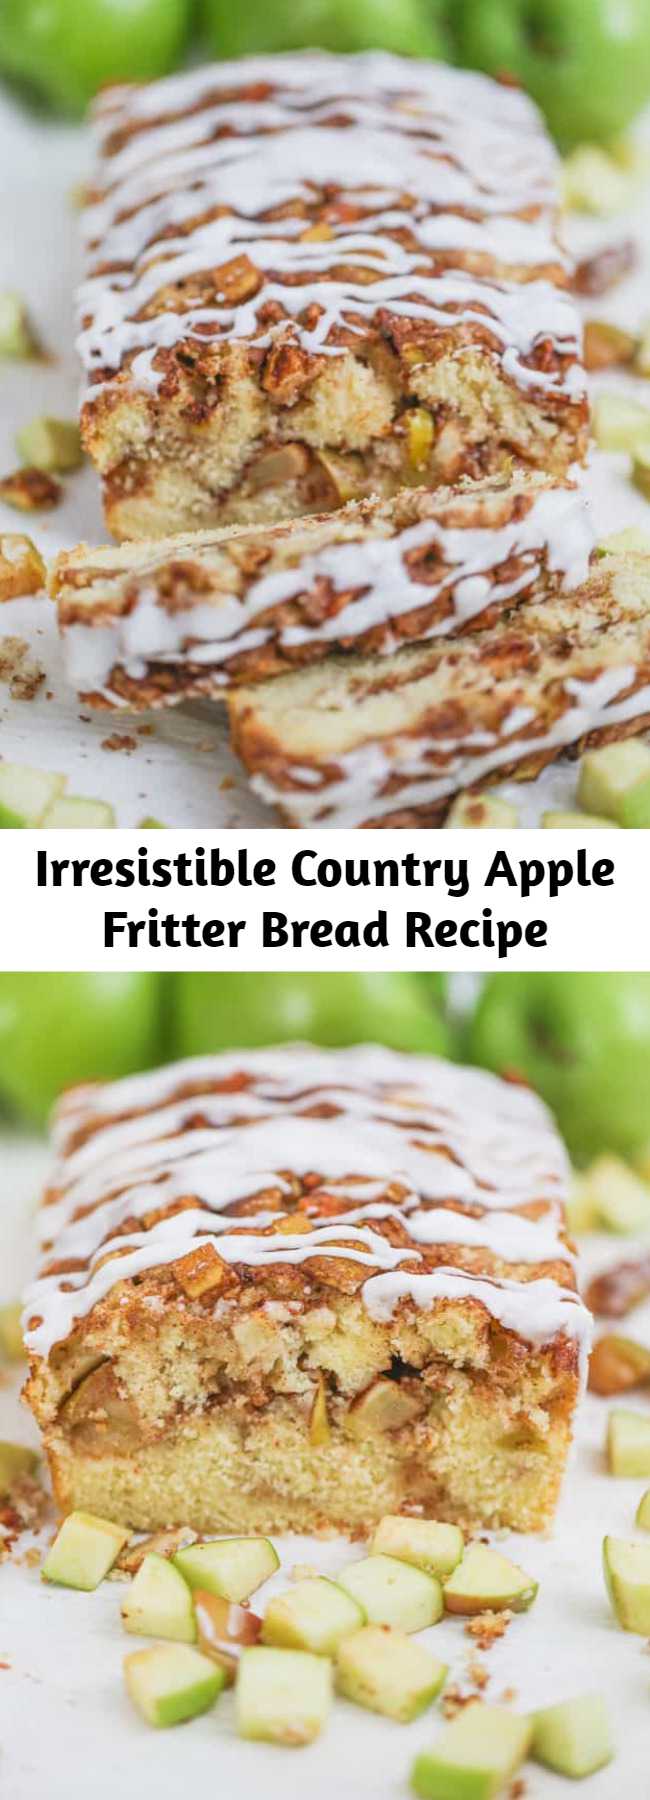 Irresistible Country Apple Fritter Bread Recipe - Have you ever had an apple fritter transformed into fluffy, buttery, white cake loaf with chunks of juicy apples and layers of brown sugar and cinnamon swirled inside and on top? Drizzle with some old-fashioned creme glaze and devour! It's so moist, and delicious. Give it up my sweet friend!  You cannot resist the temptation of Awesome Country Apple Fritter Bread!!! #apple #bread #quickbread #fritter #baking #fall #holidays